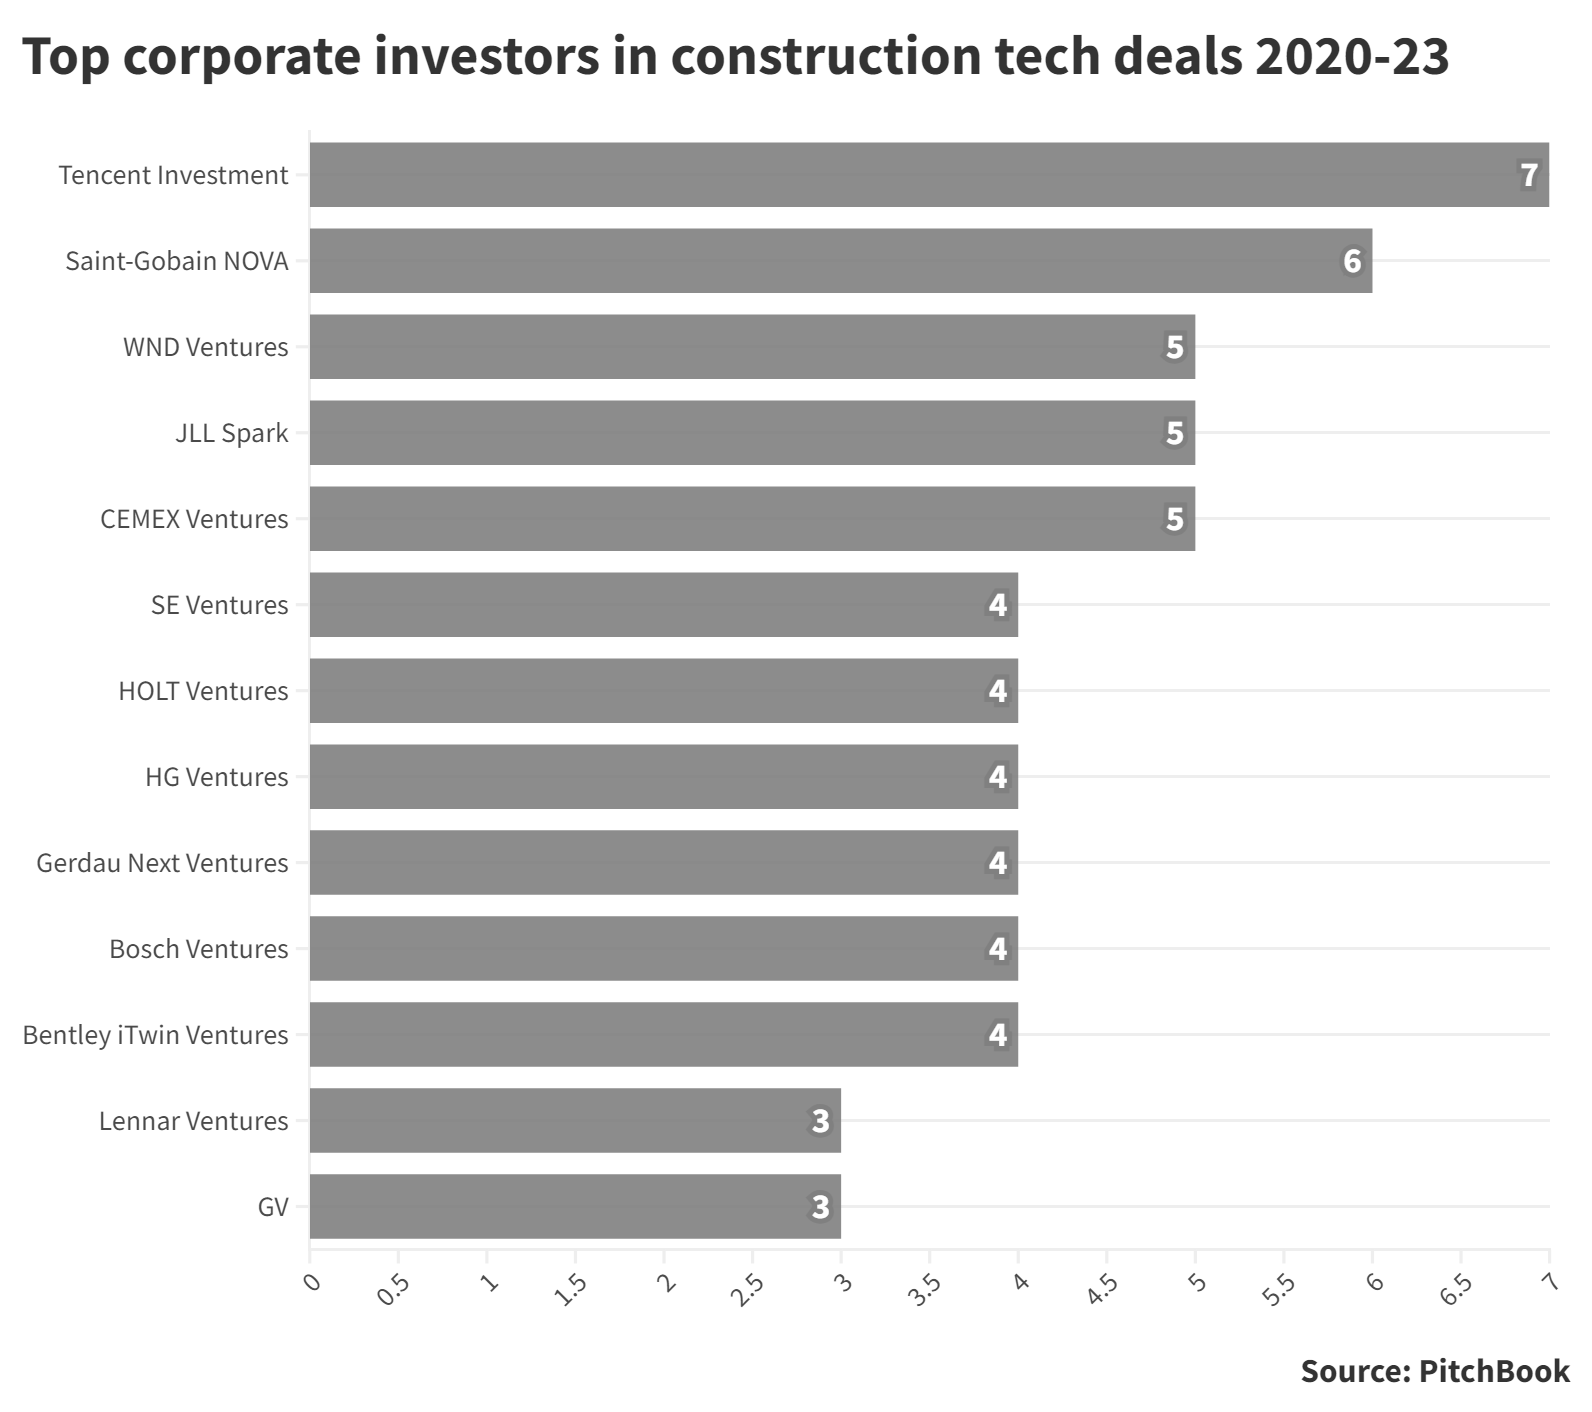 Top corporate investors in construction tech deals 2020-2023, data provided by PitchBook